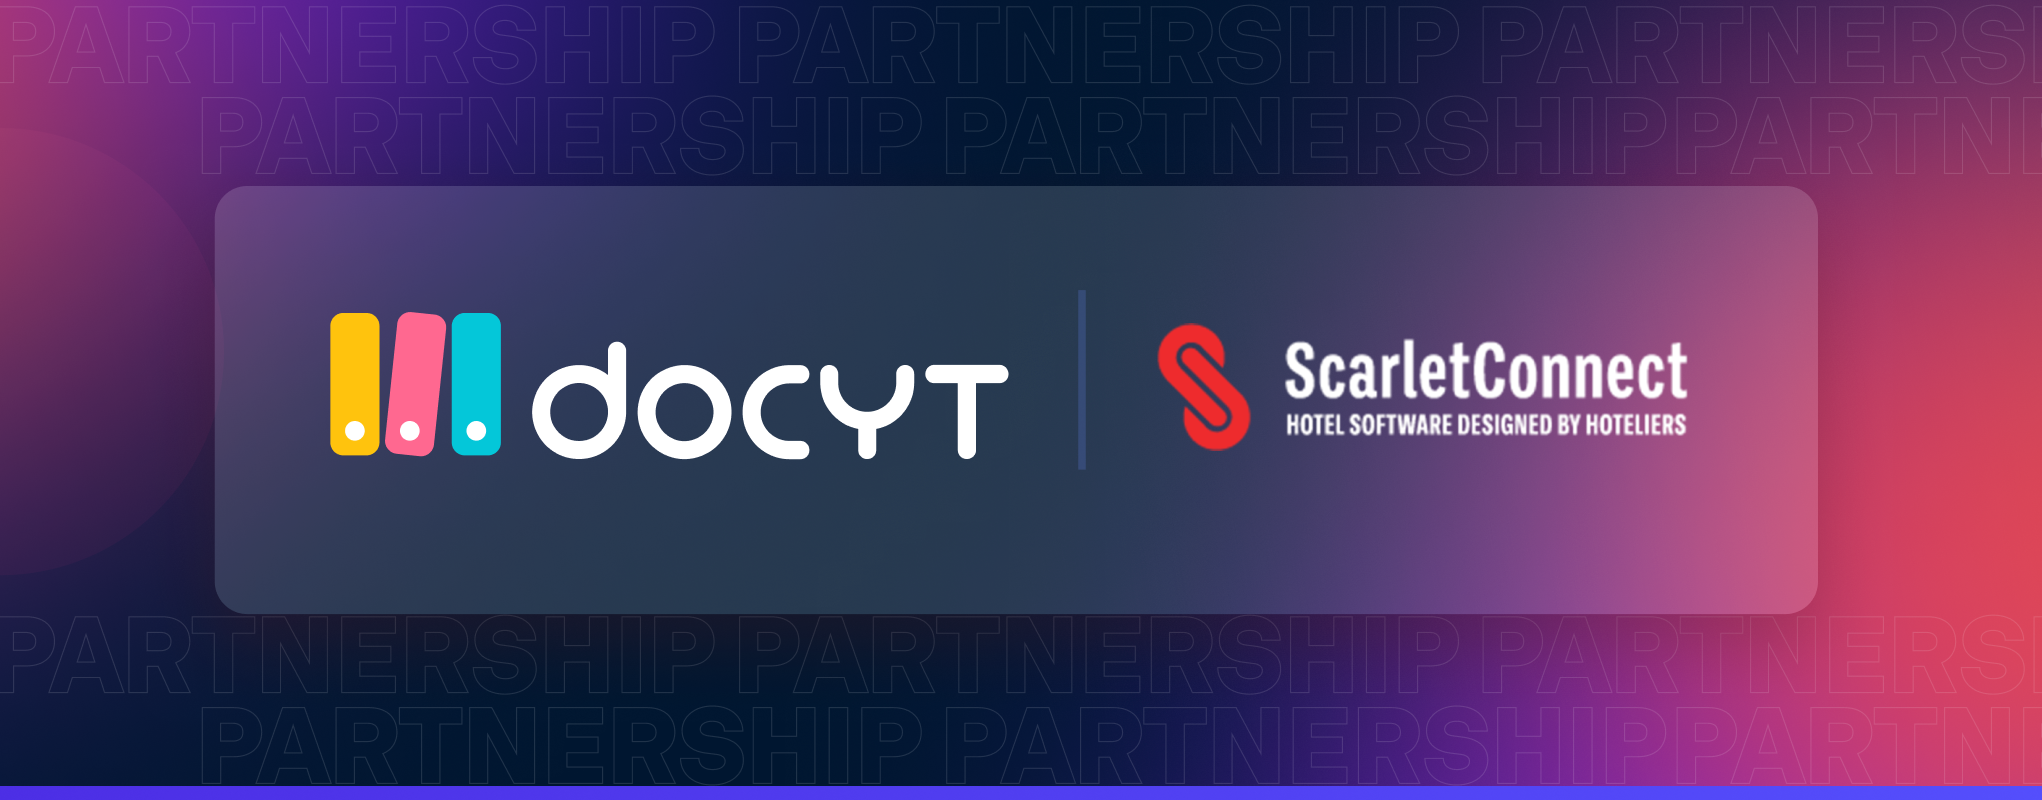 Final Docyt Partners With Scarlet Connect To Help Hotels Manage Reputation Effectively